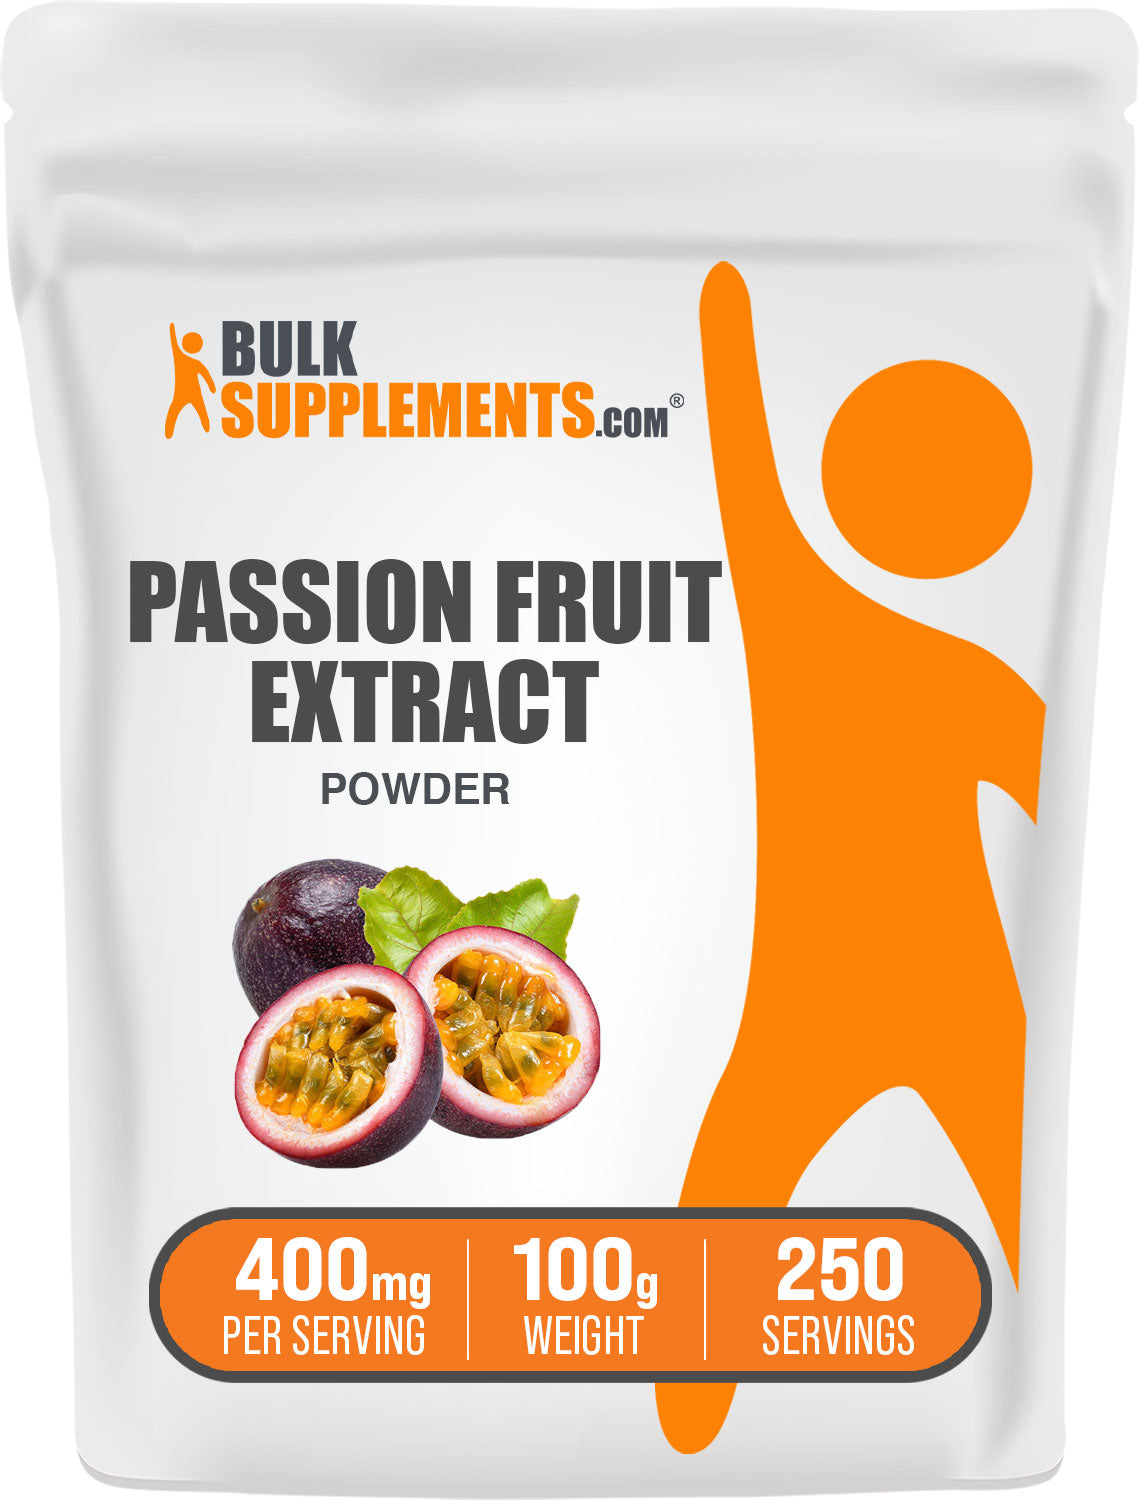 Passion Fruit Extract 100g Bag